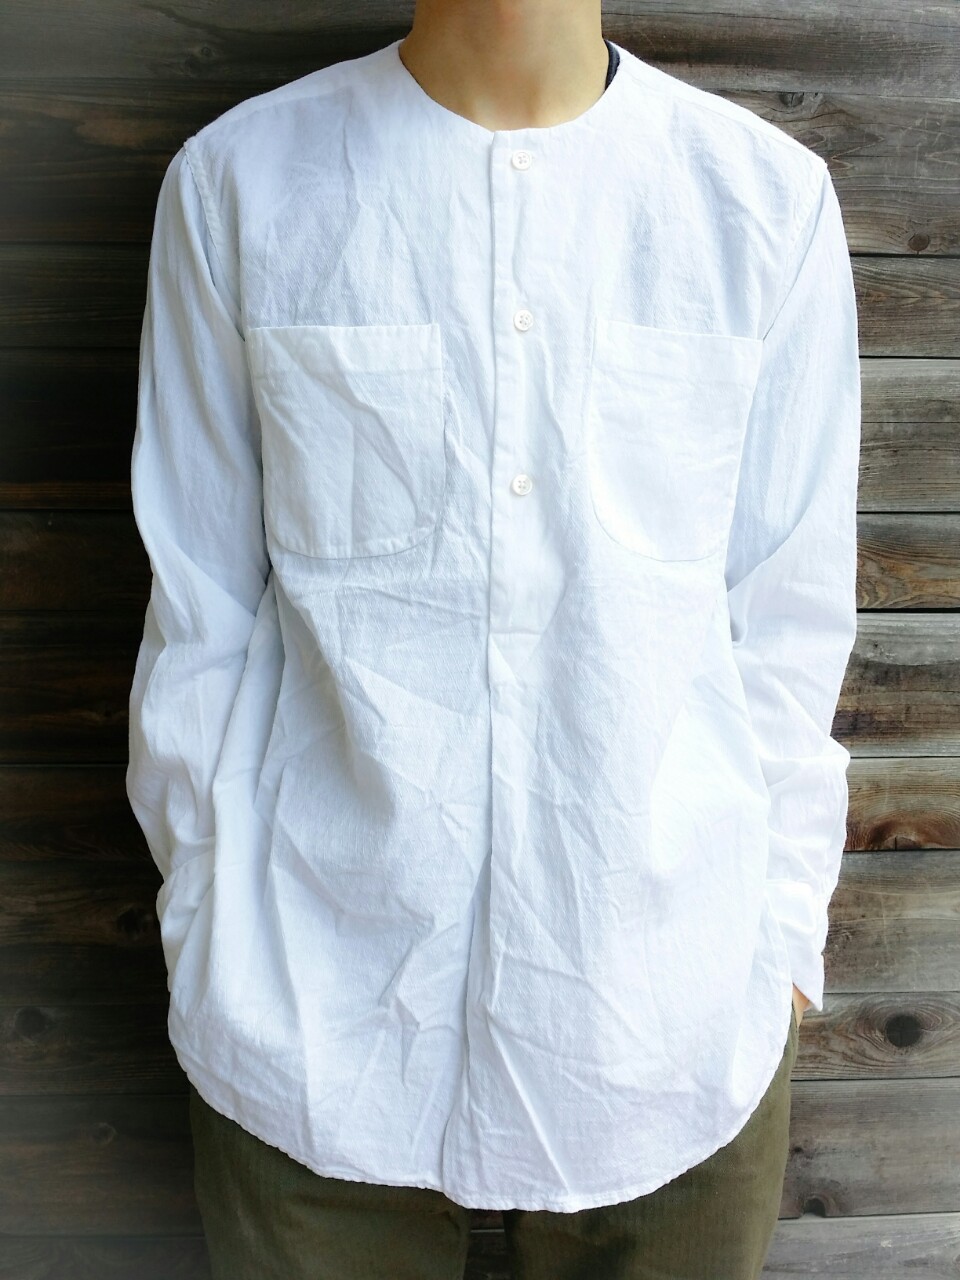 □「Irving Shirt / Engineered Garments」 | one day rules